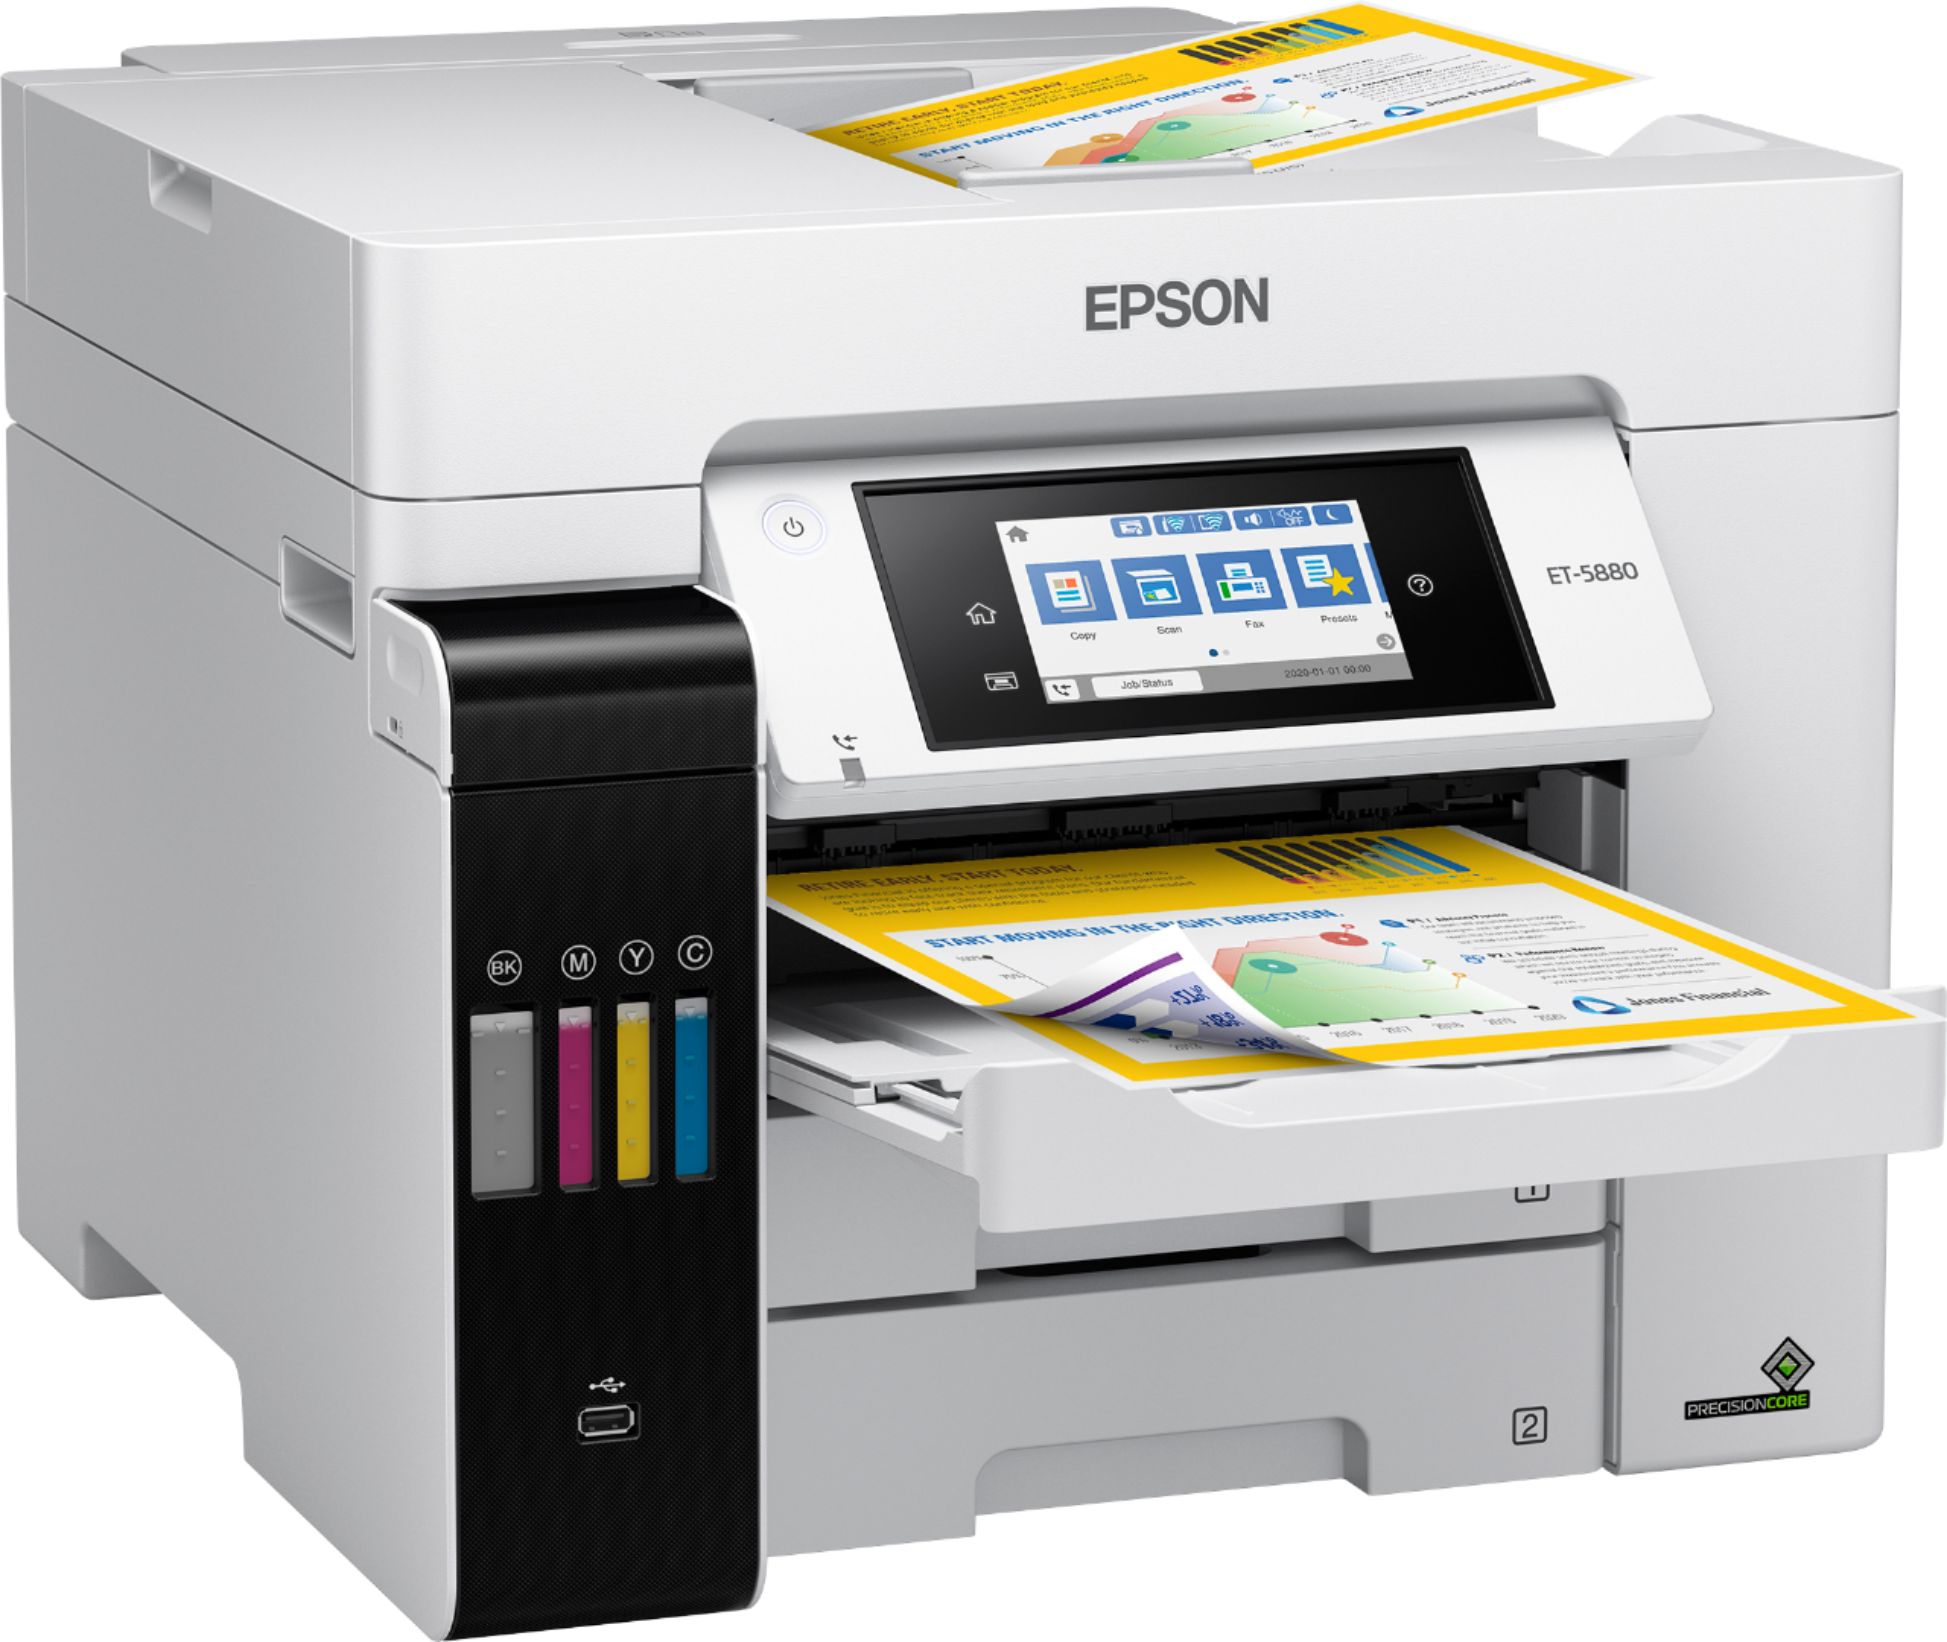 Customer Reviews Epson Ecotank Pro Et 5880 Wireless All In One Inkjet Printer With Pcl Support 9334